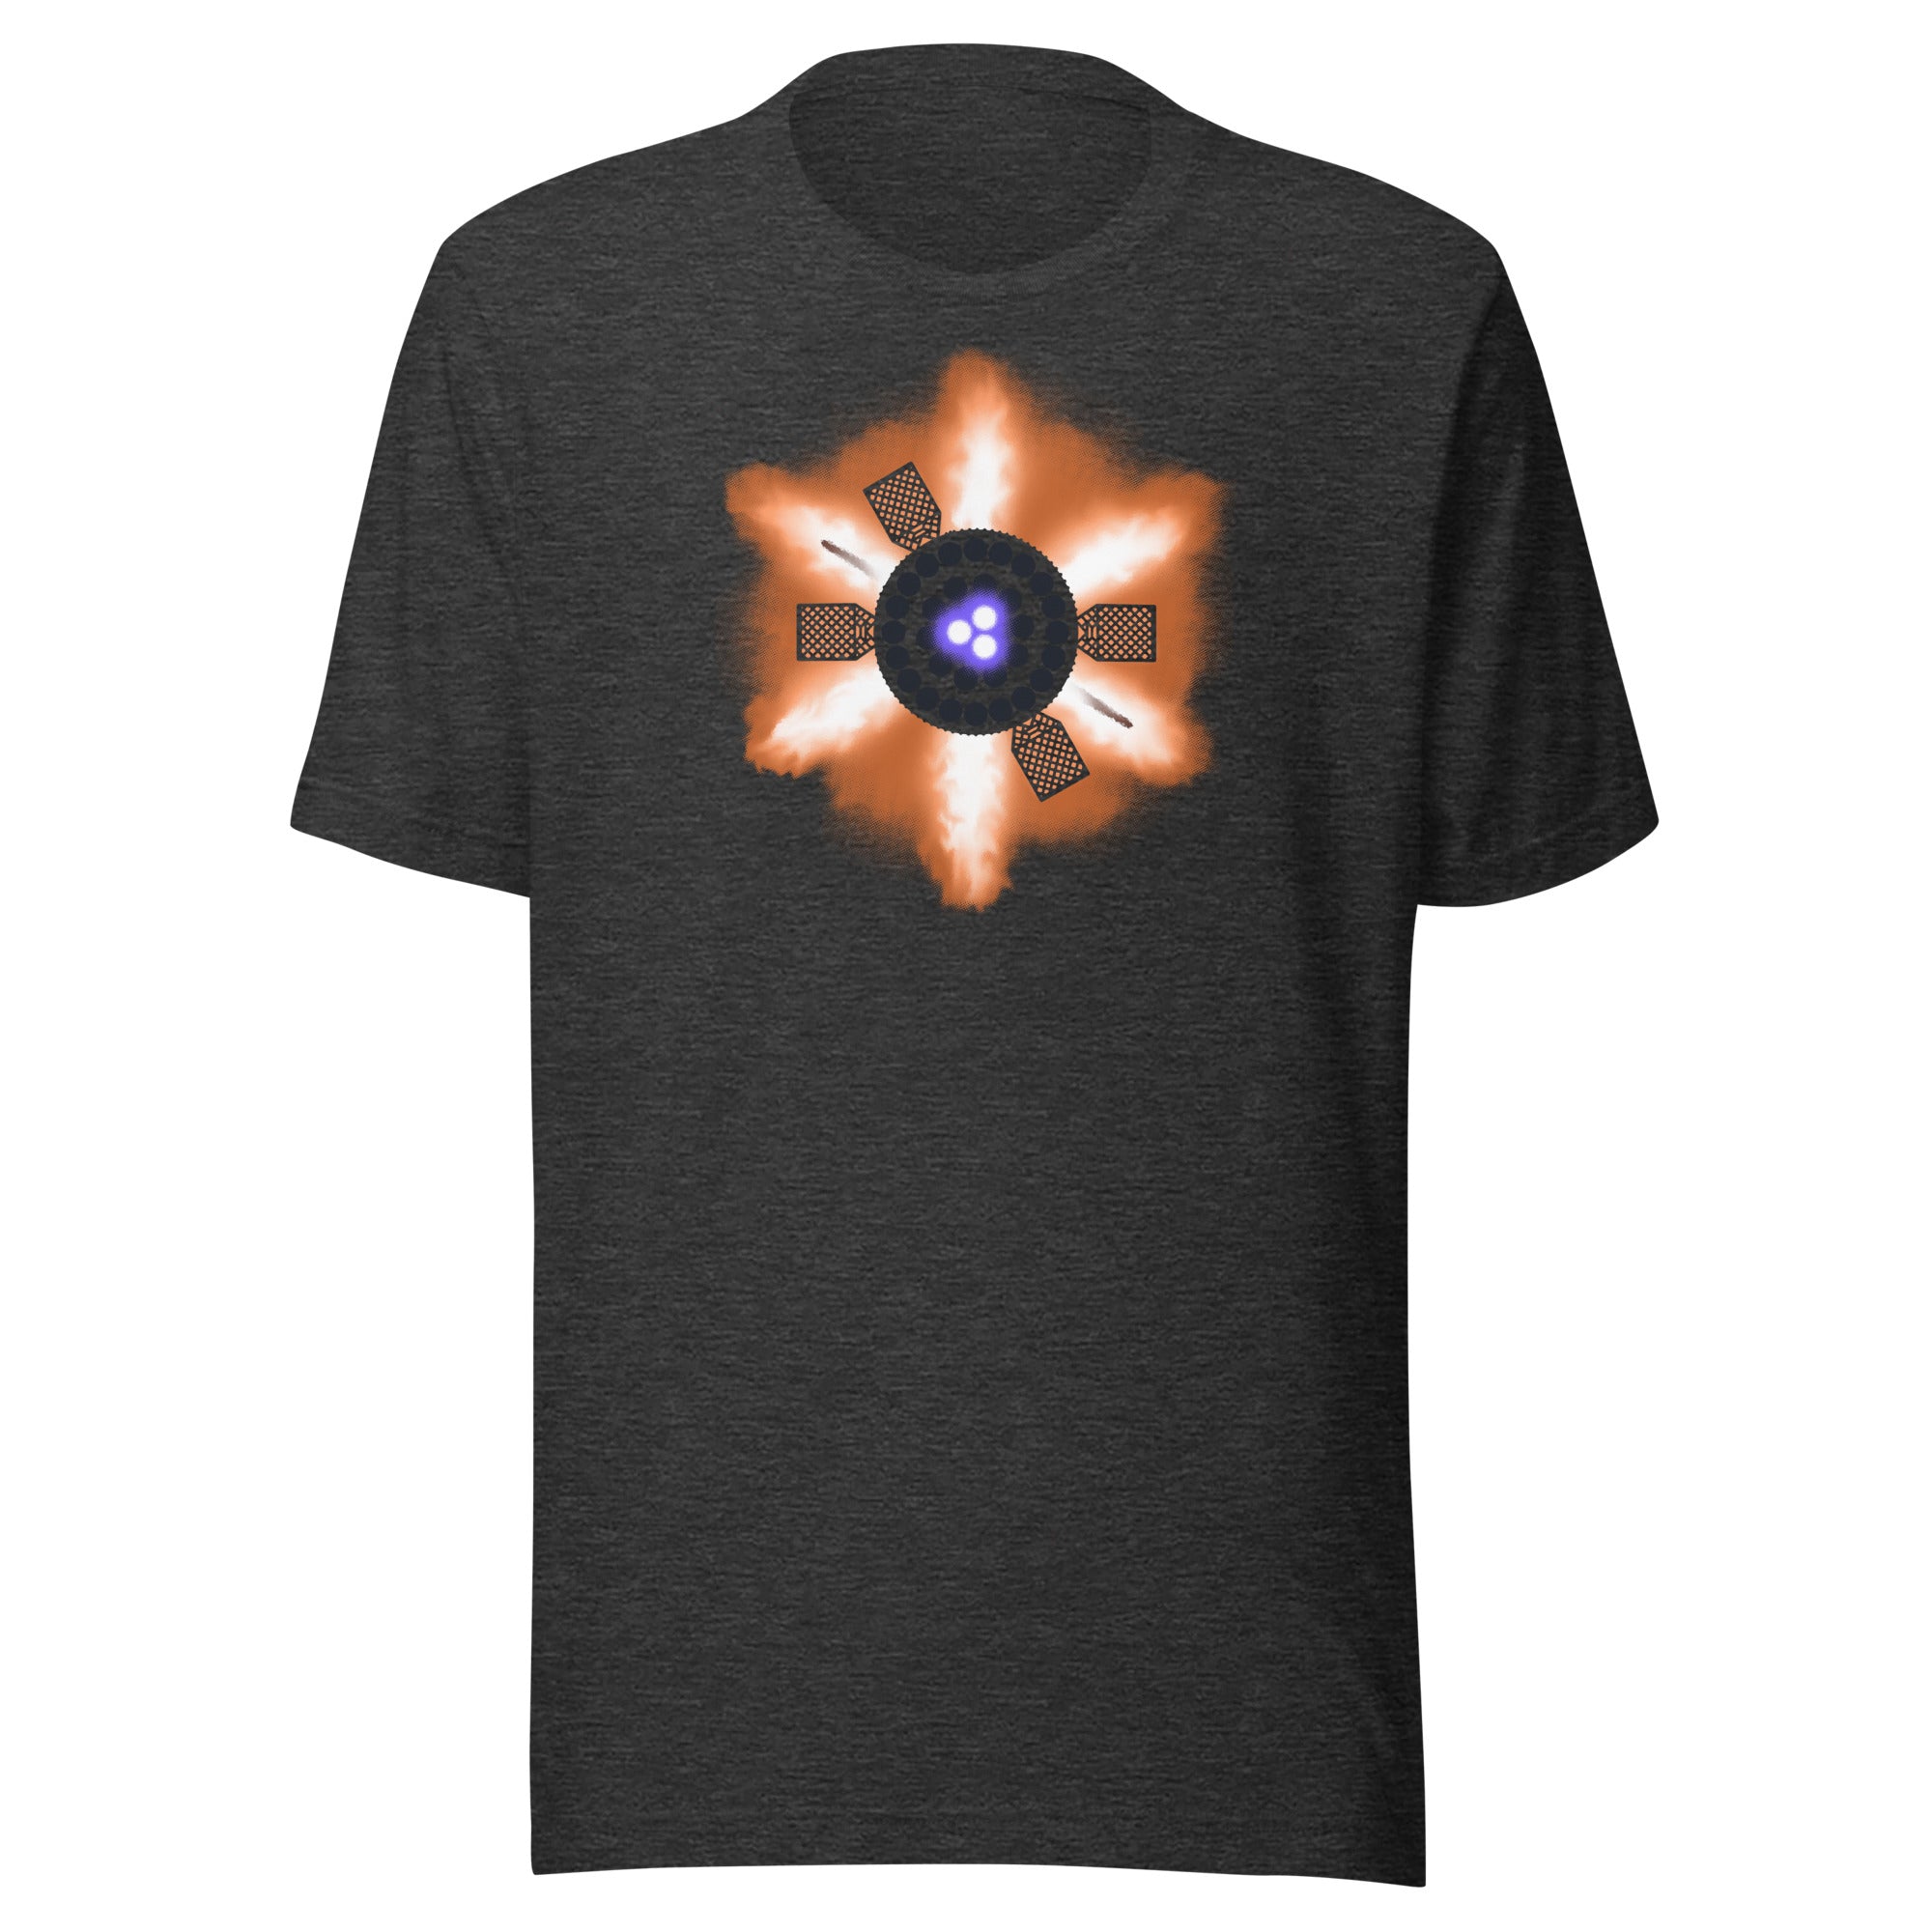 Hot Staging - Unisex T-Shirt